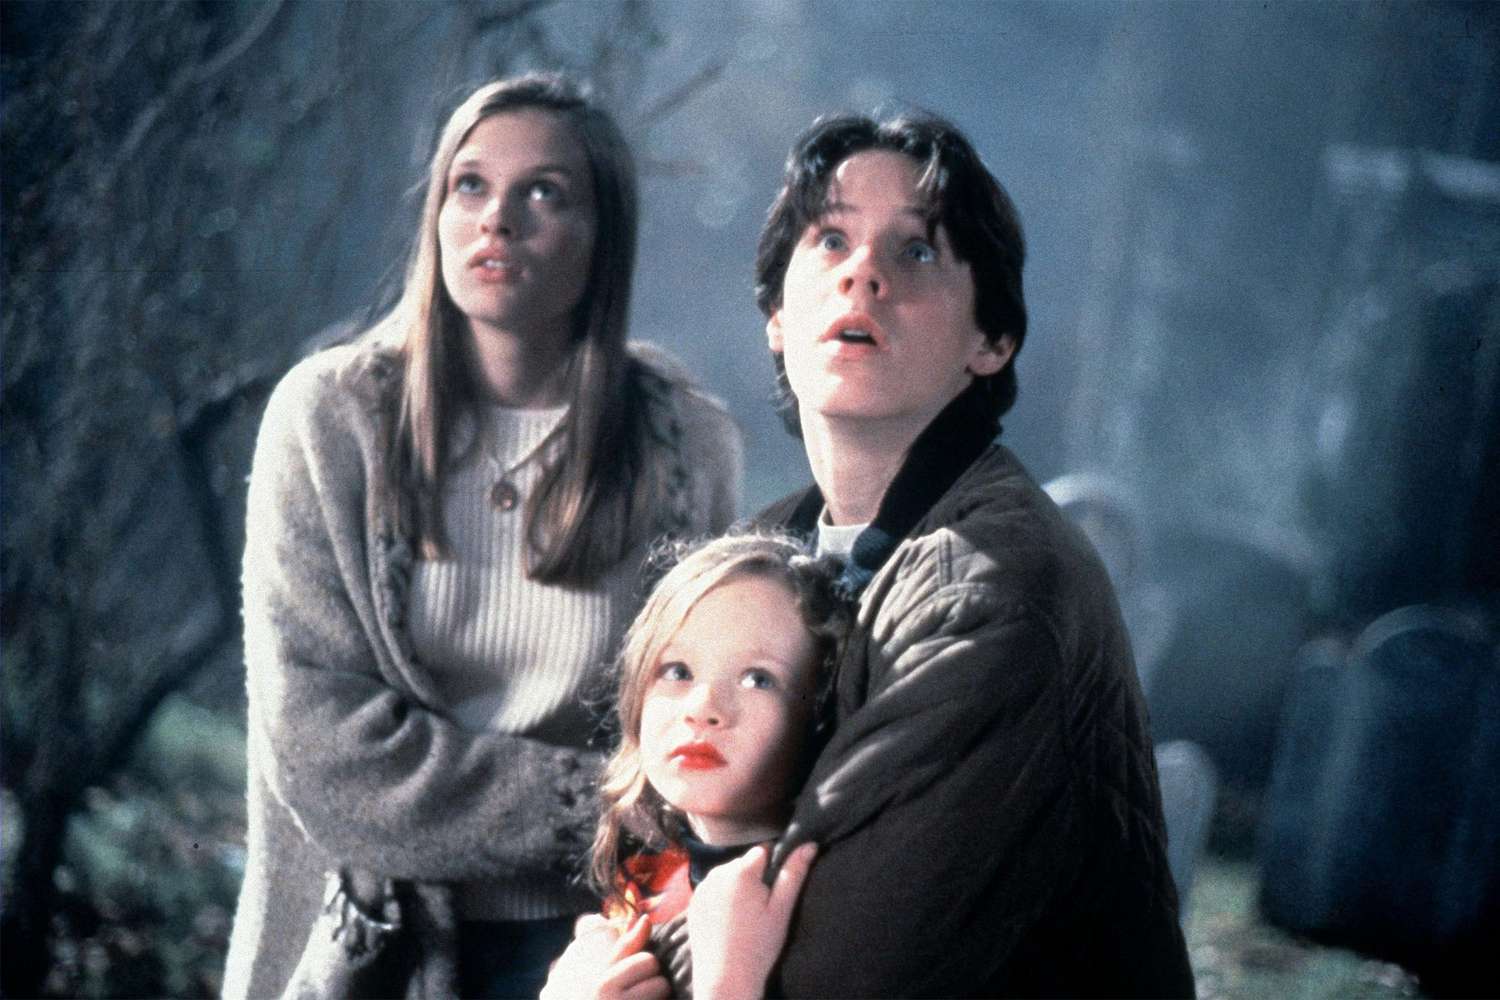 OG actors aren't in 'Hocus Pocus 2,' but characters Max, Allison, and Dani are